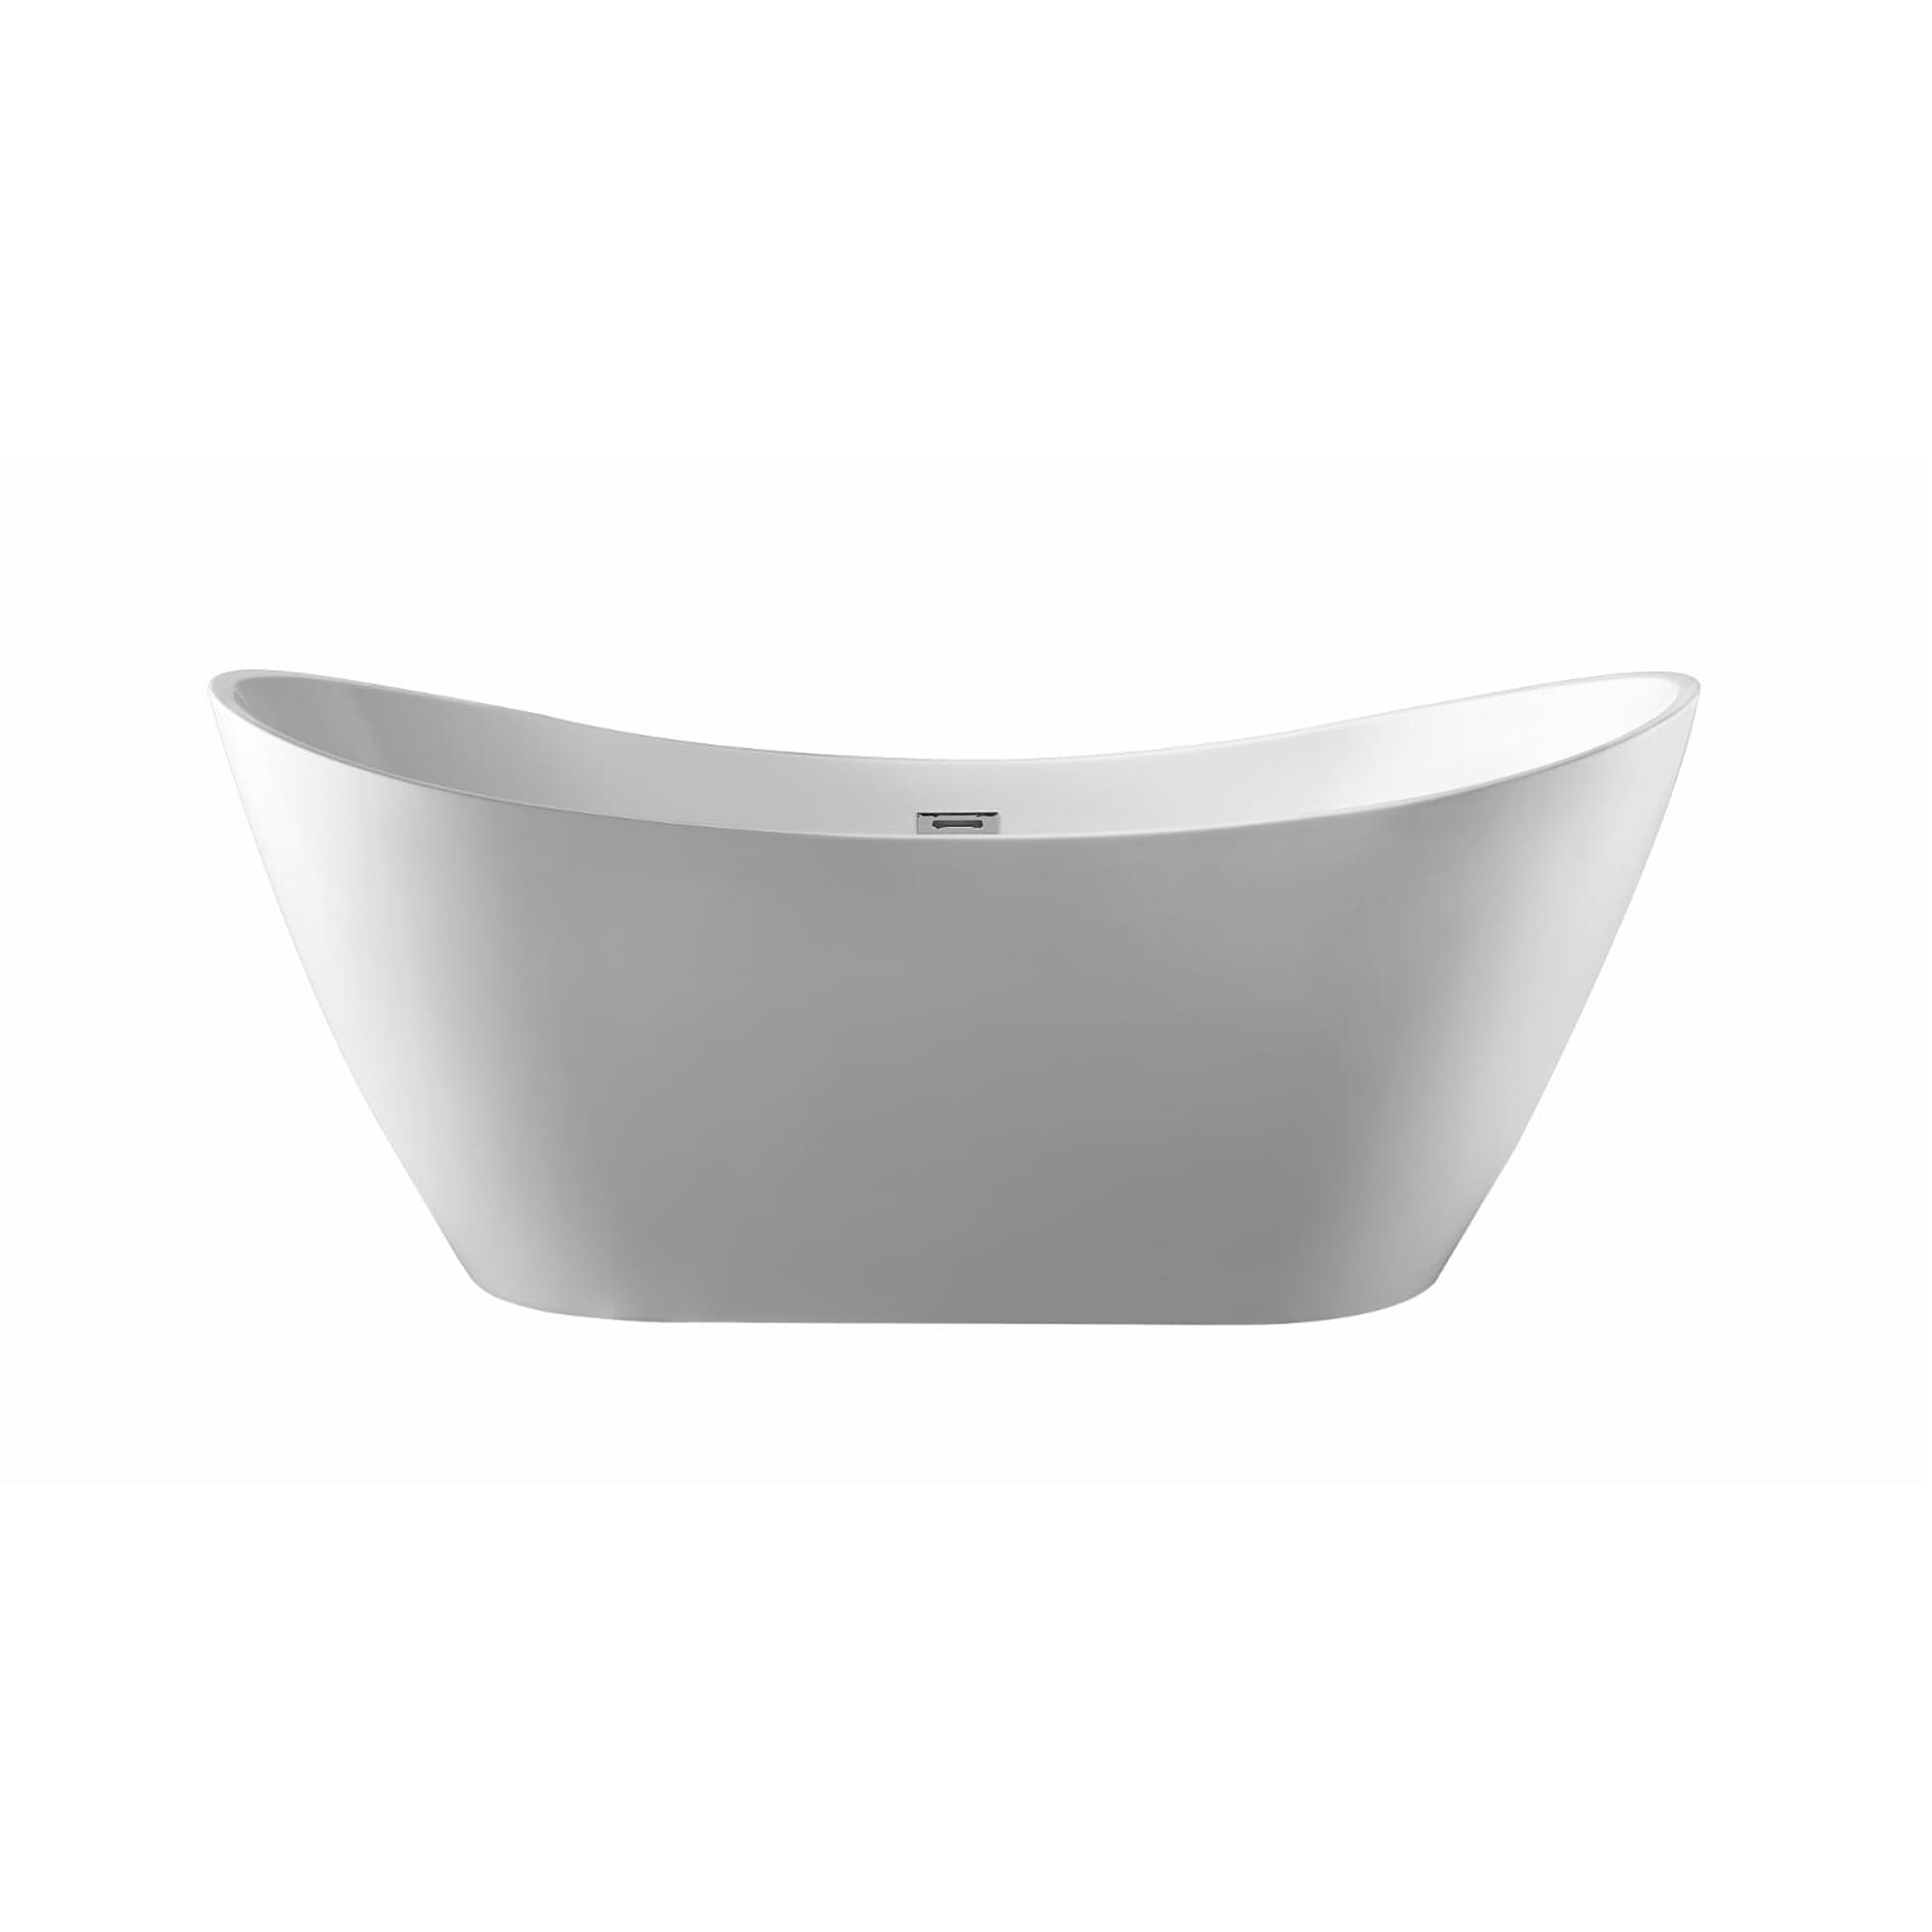 Pulse Pt 1006 Ch Chrome Pulse Tubs 69 Free Standing Acrylic Soaking Tub With Center Drain Drain Assembly And Overflow Faucet Com